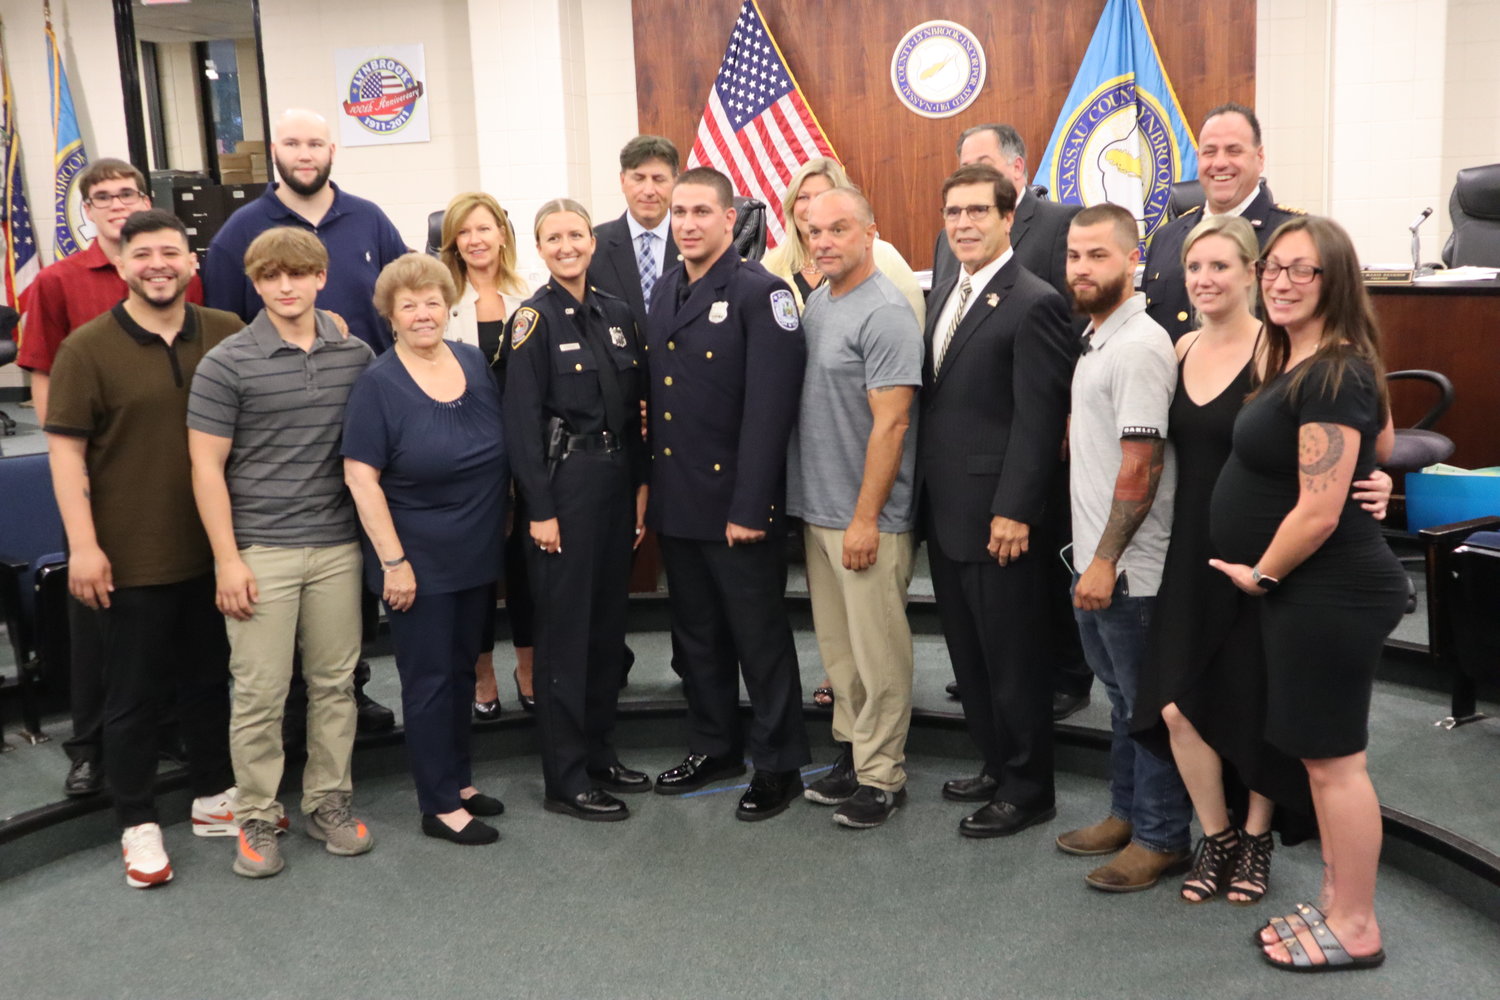 Newly minted Lynbrook Police Officer Joshua Crowley took his oath to protect and serve, surrounded by family and members of the village board.